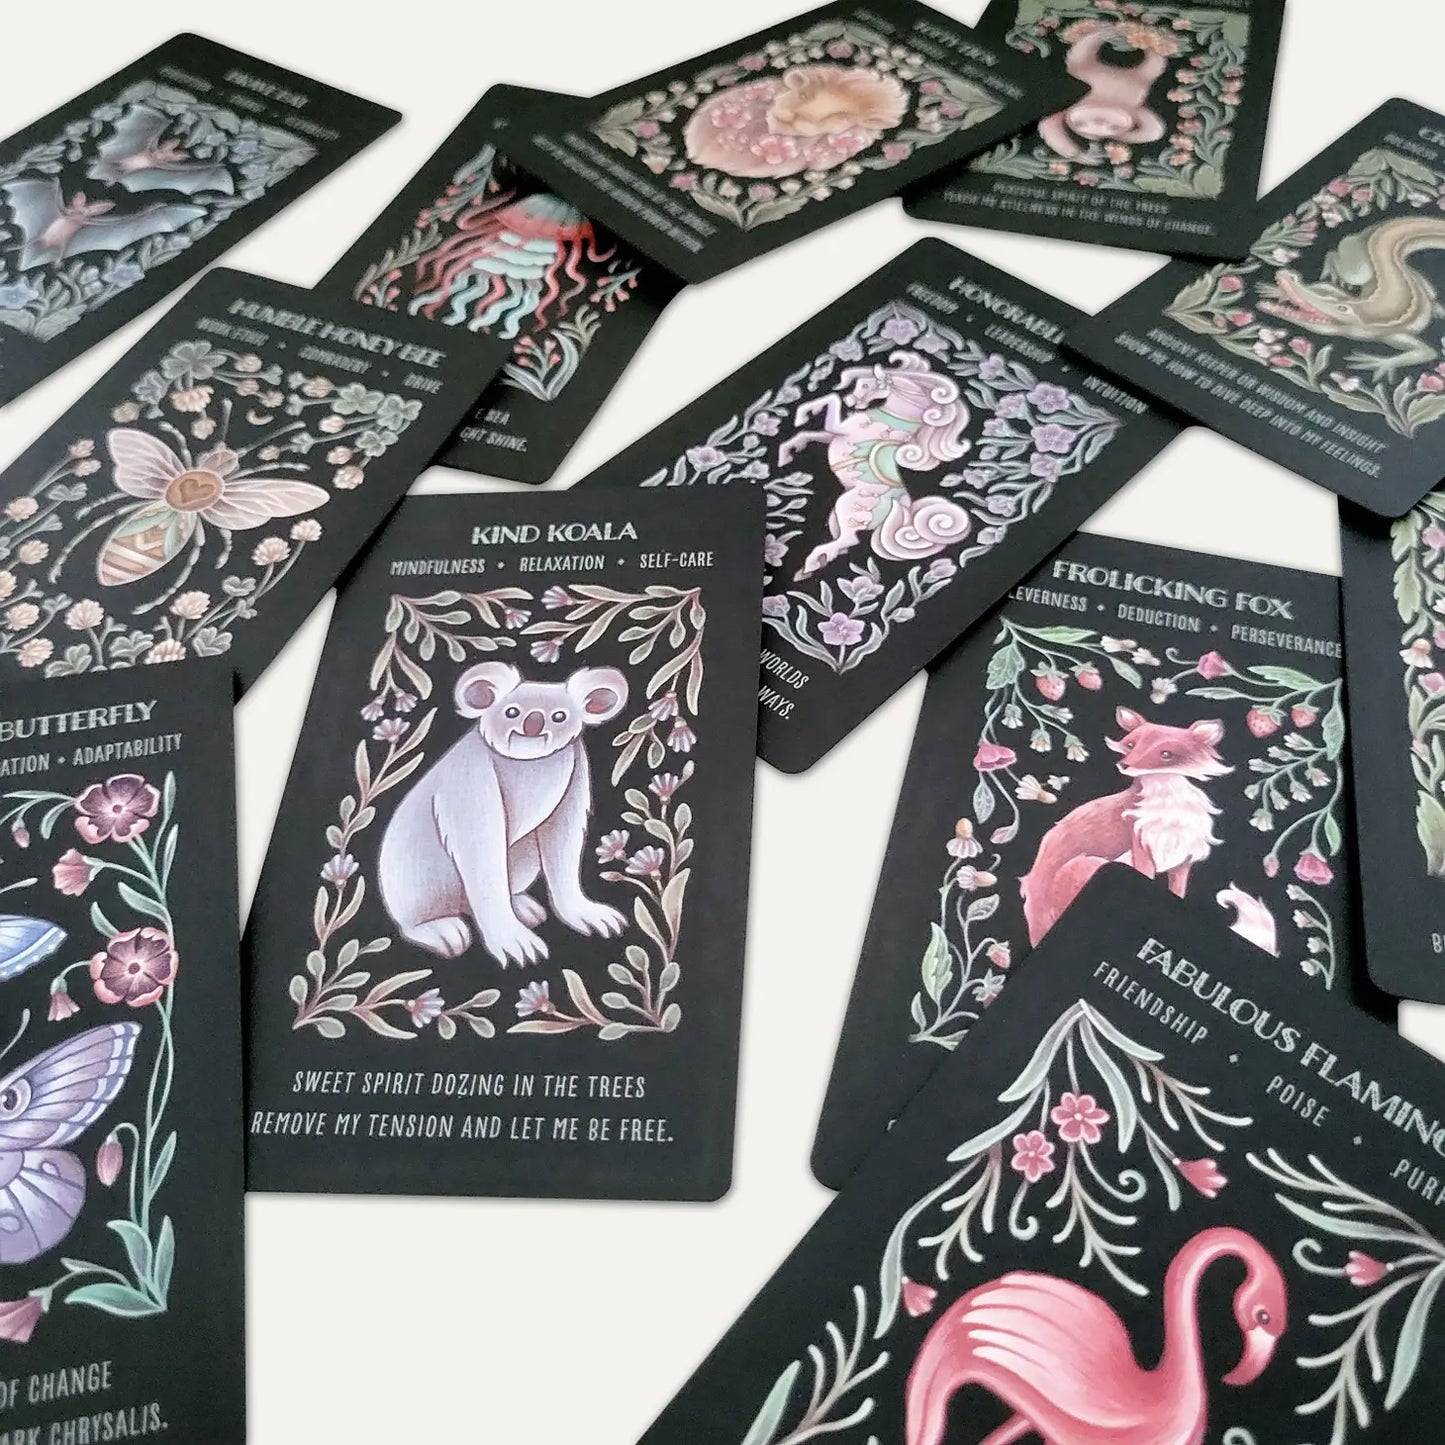 Wild Whiskers Oracle Deck- Spiritual Animal Divination Cards